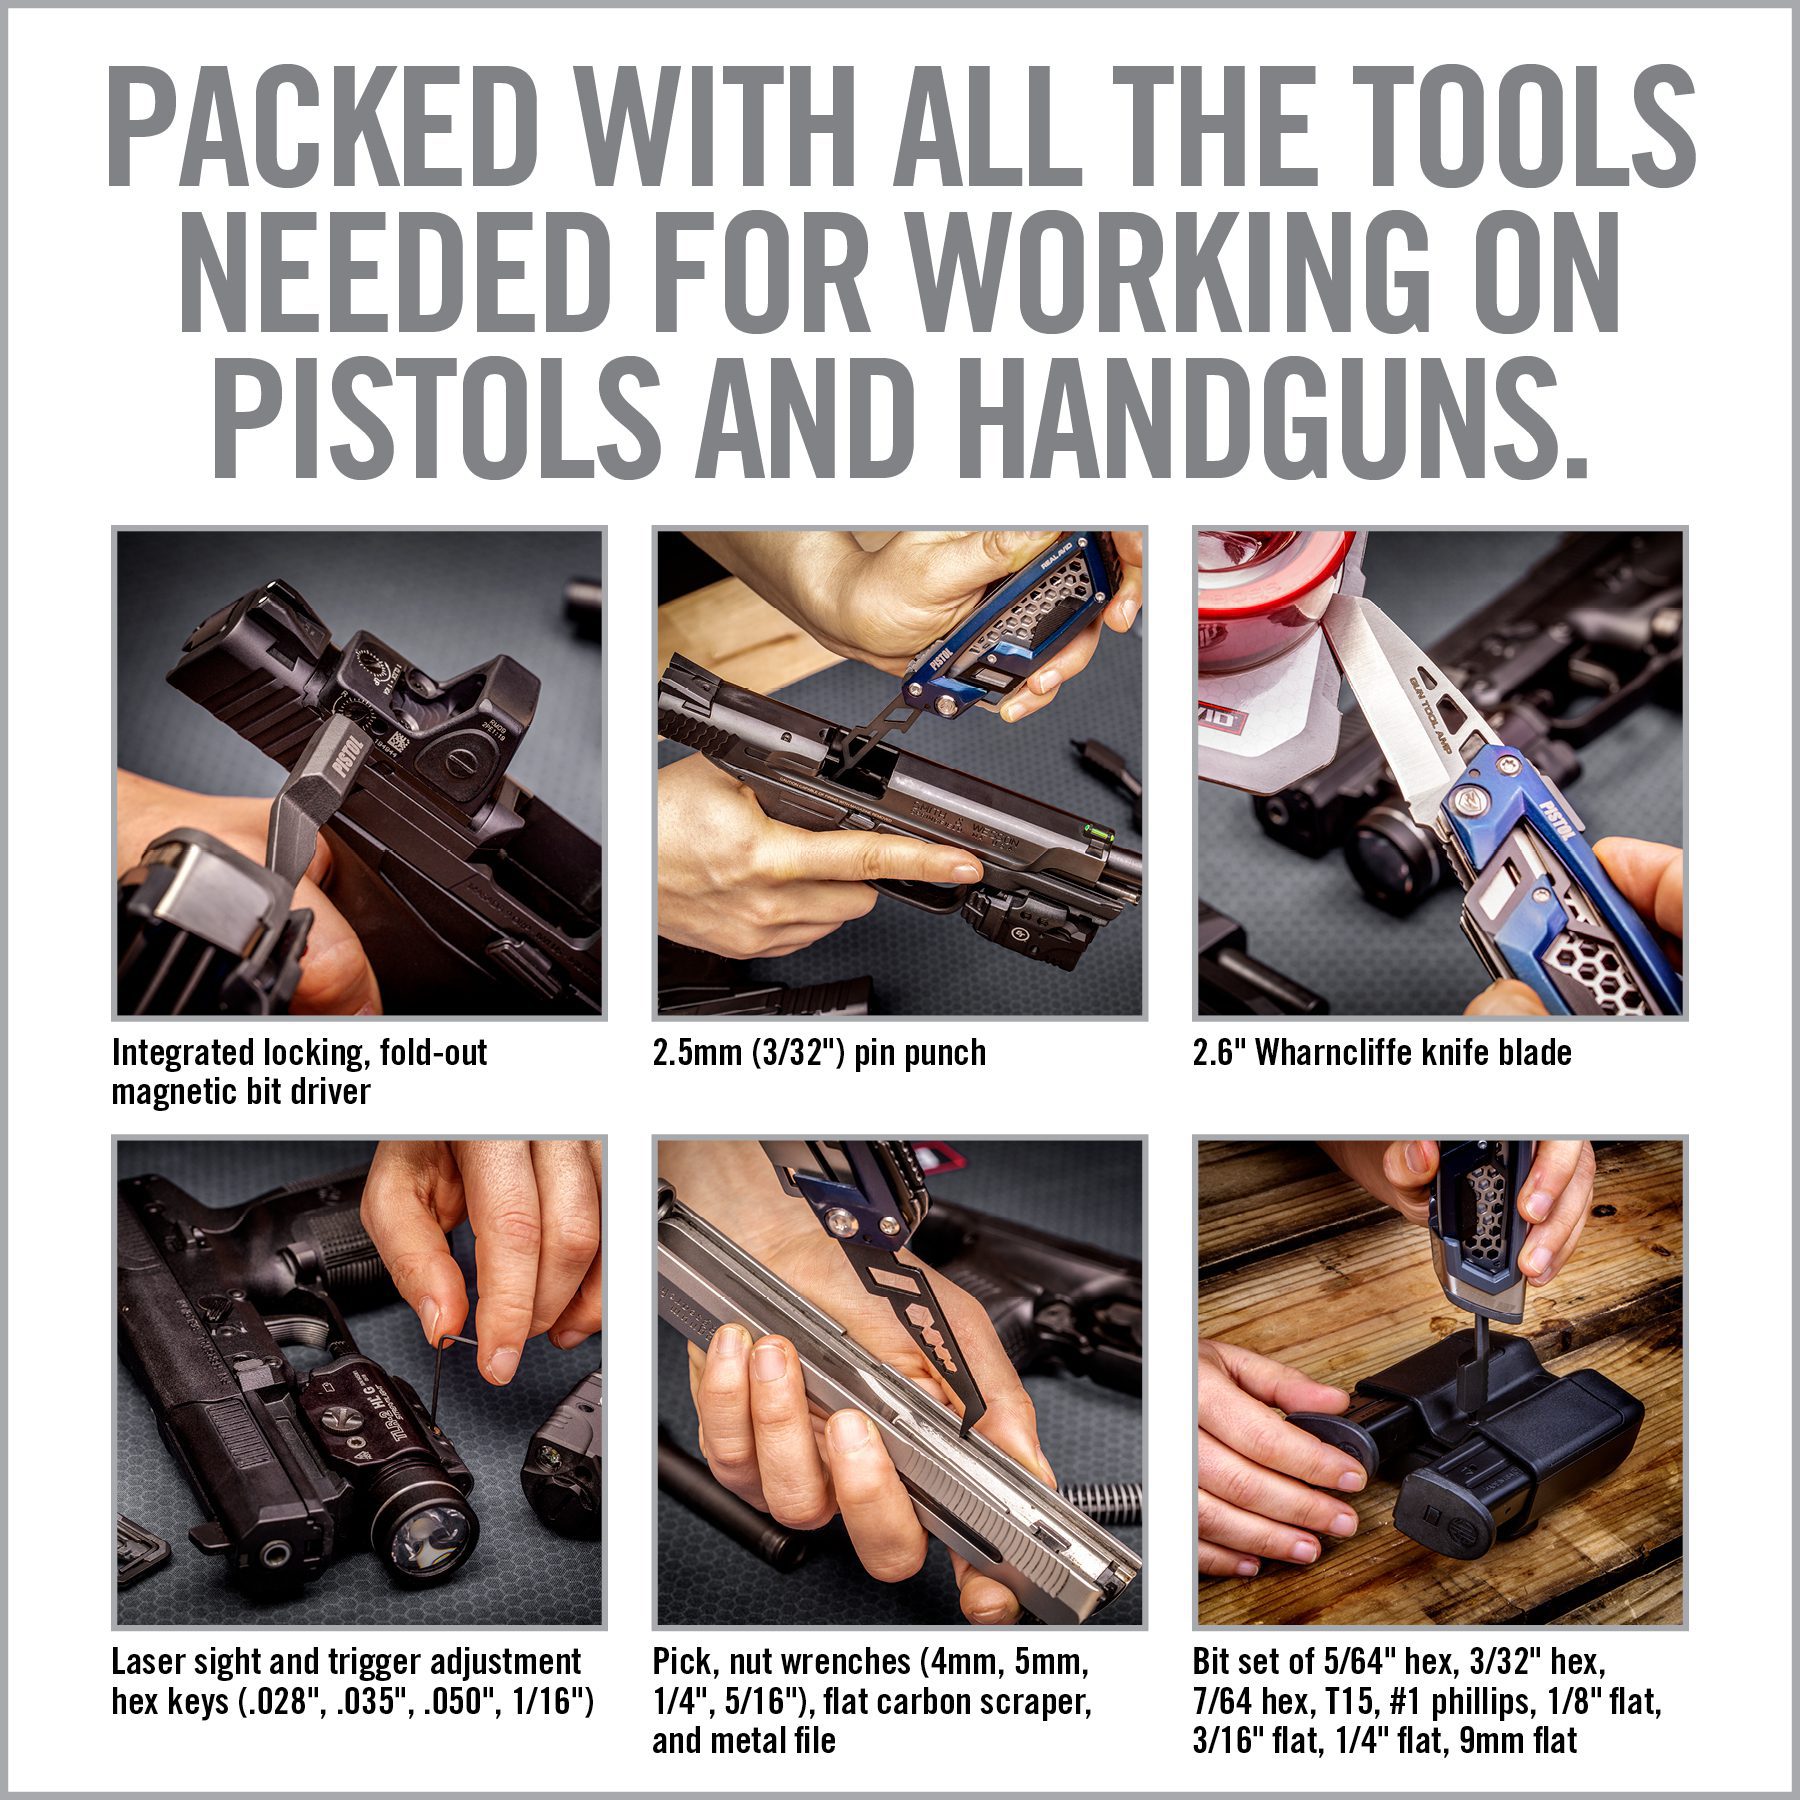 instructions for working on pistols and handguns